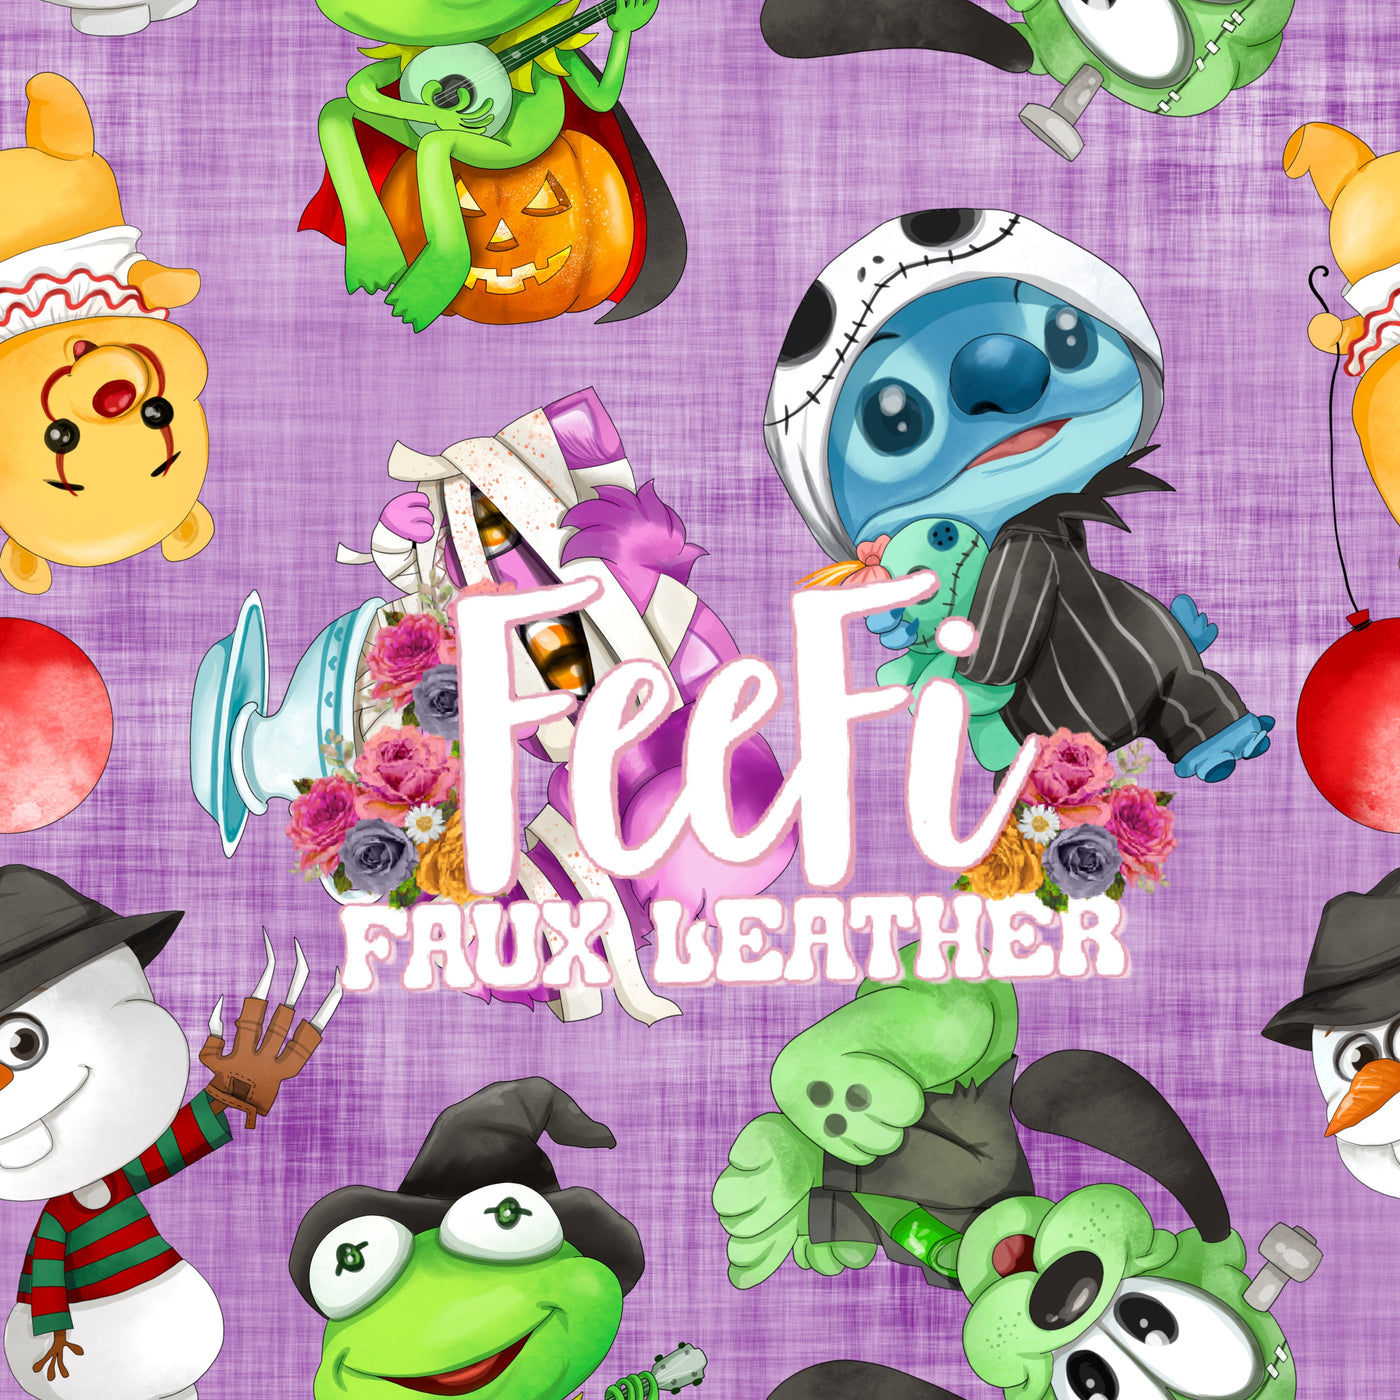 Halloween Characters Litchi Printed Faux Leather Sheet Litchi has a pebble like feel with bright colors